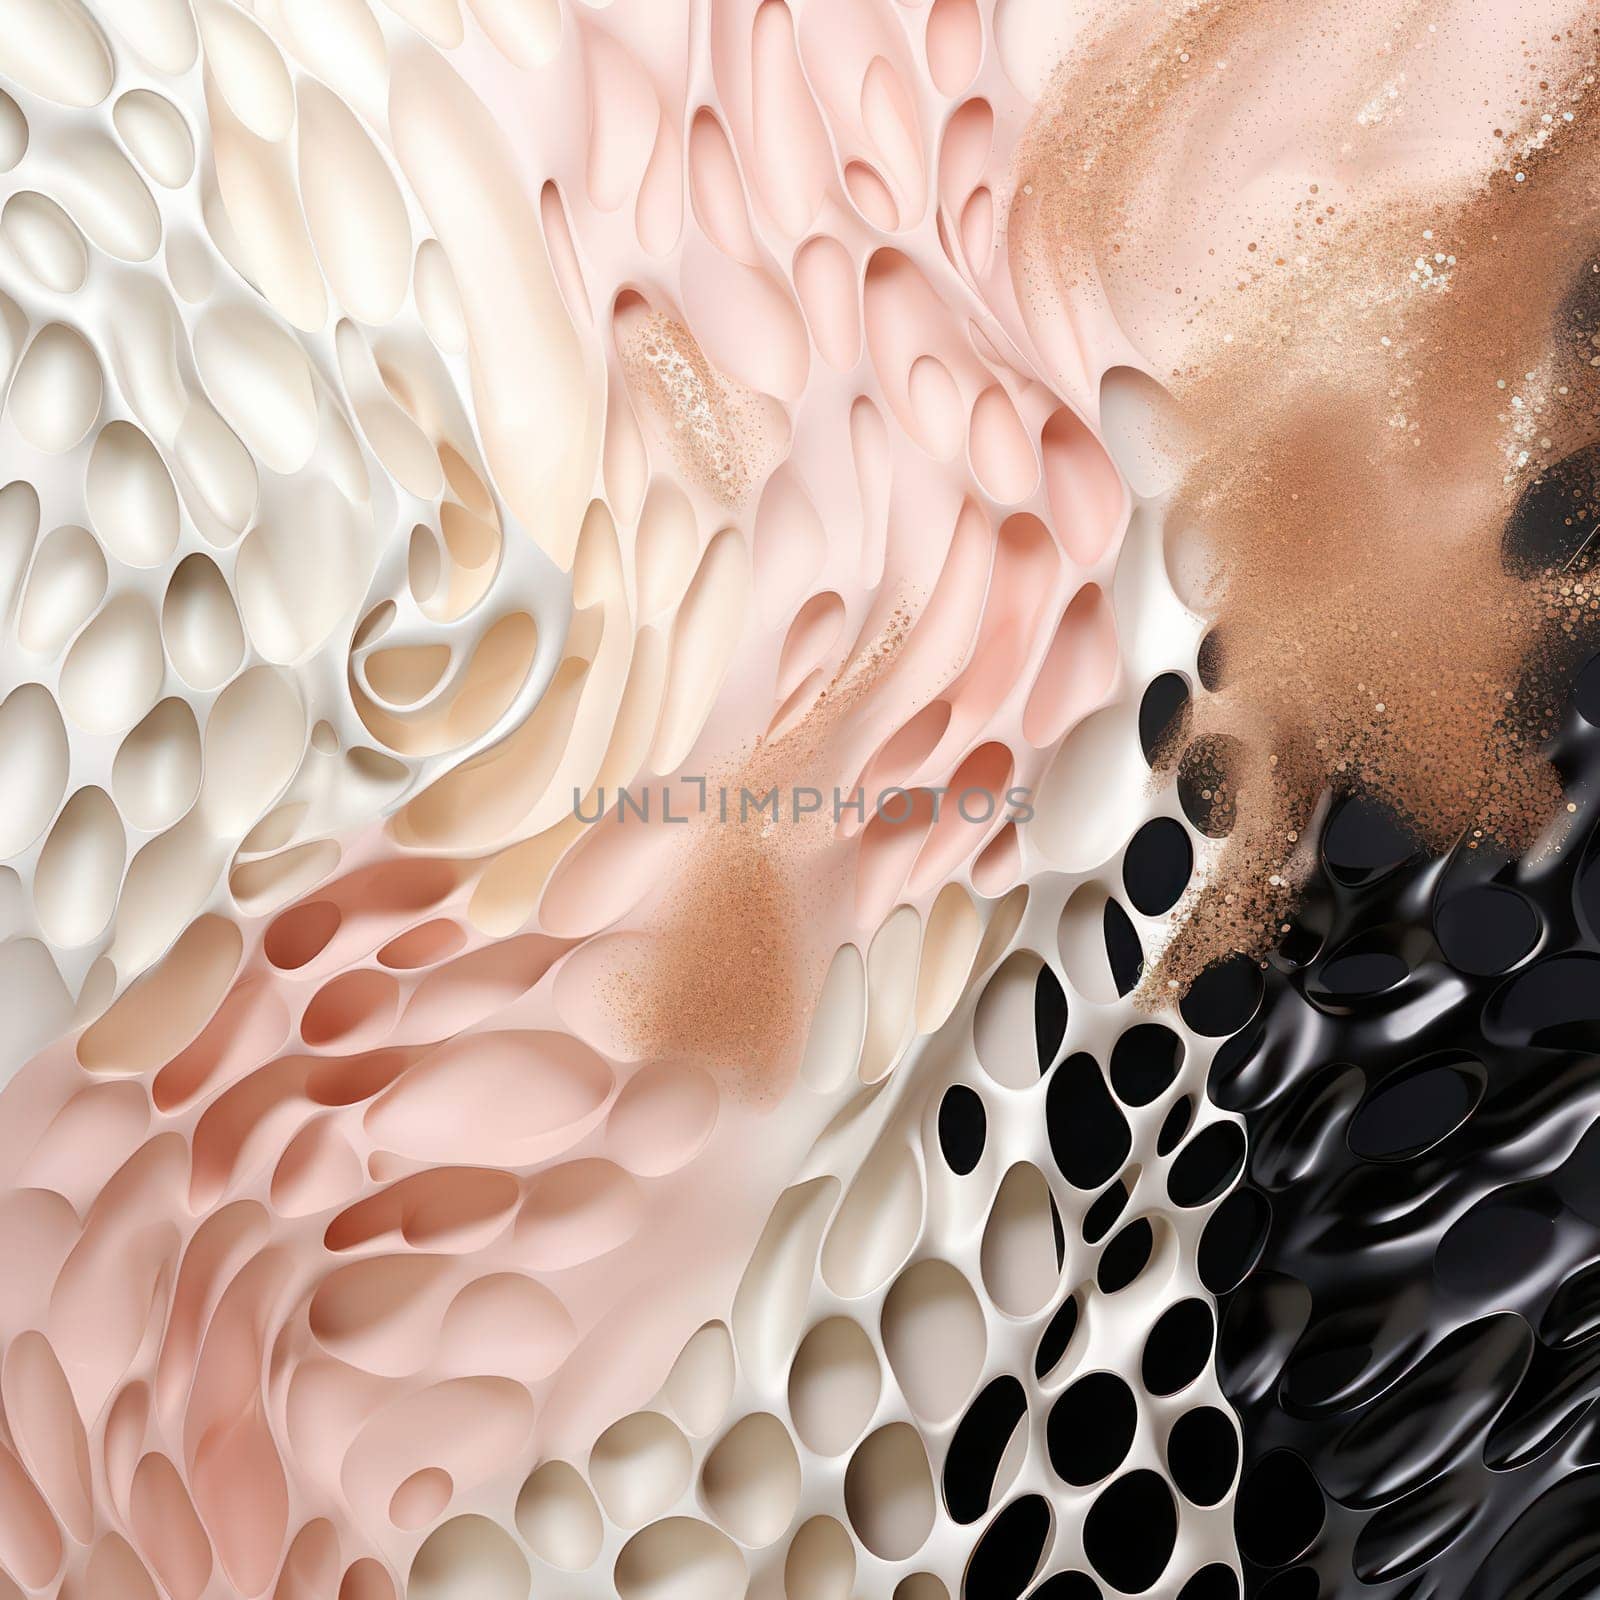 Abstract Textured Design: A Modern Fashion Illustration of Pink Fluid Paint on a White Background by Vichizh